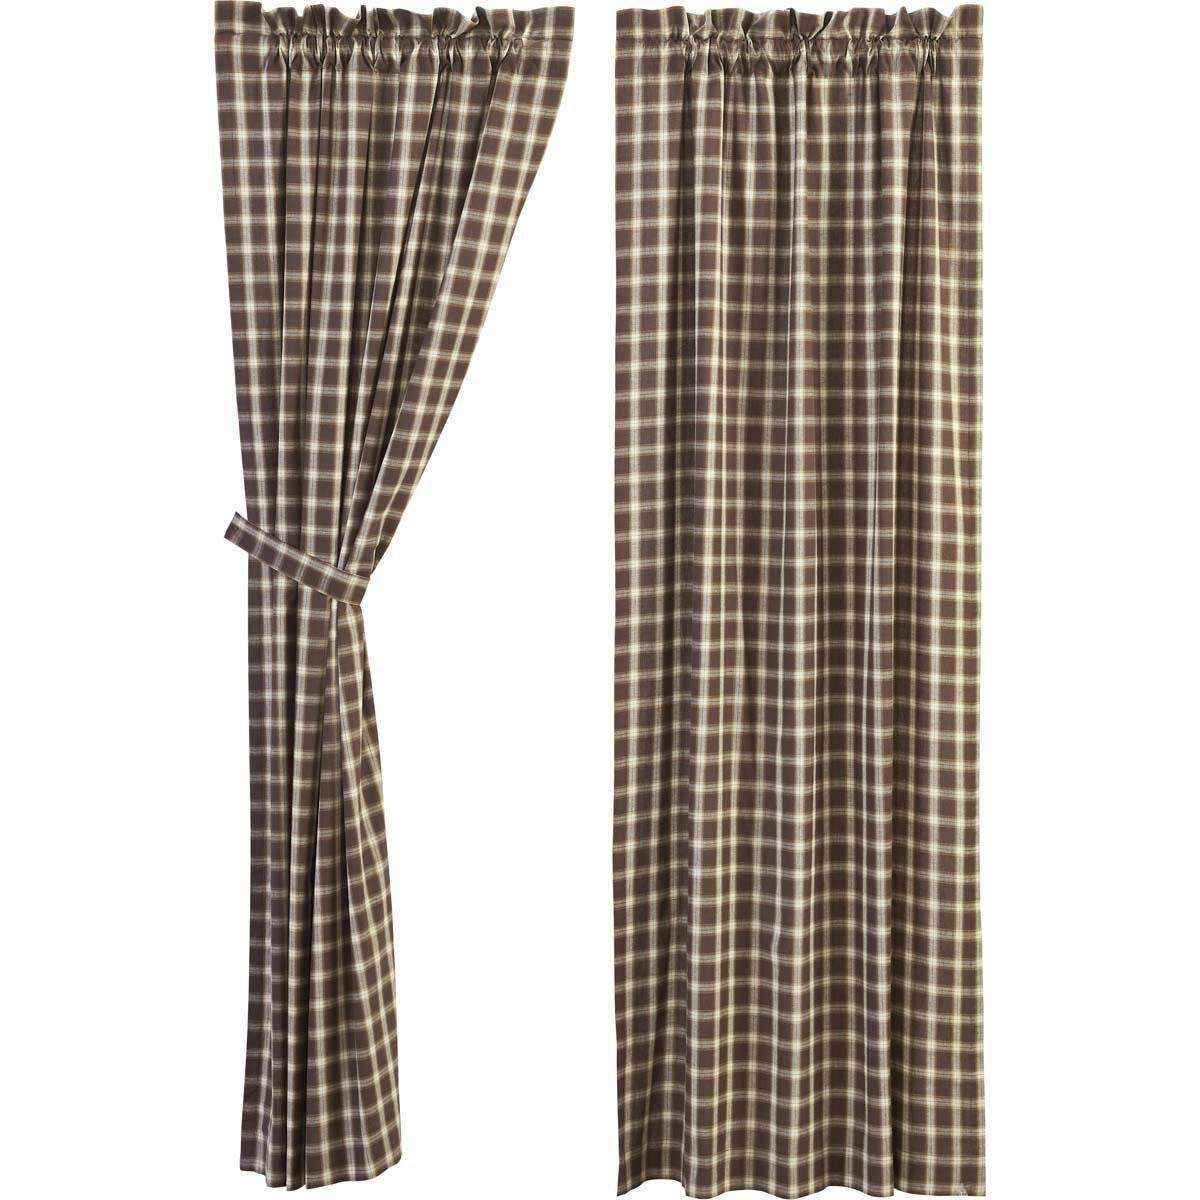 Rory Panel Brown Curtain Set of 2 - The Fox Decor